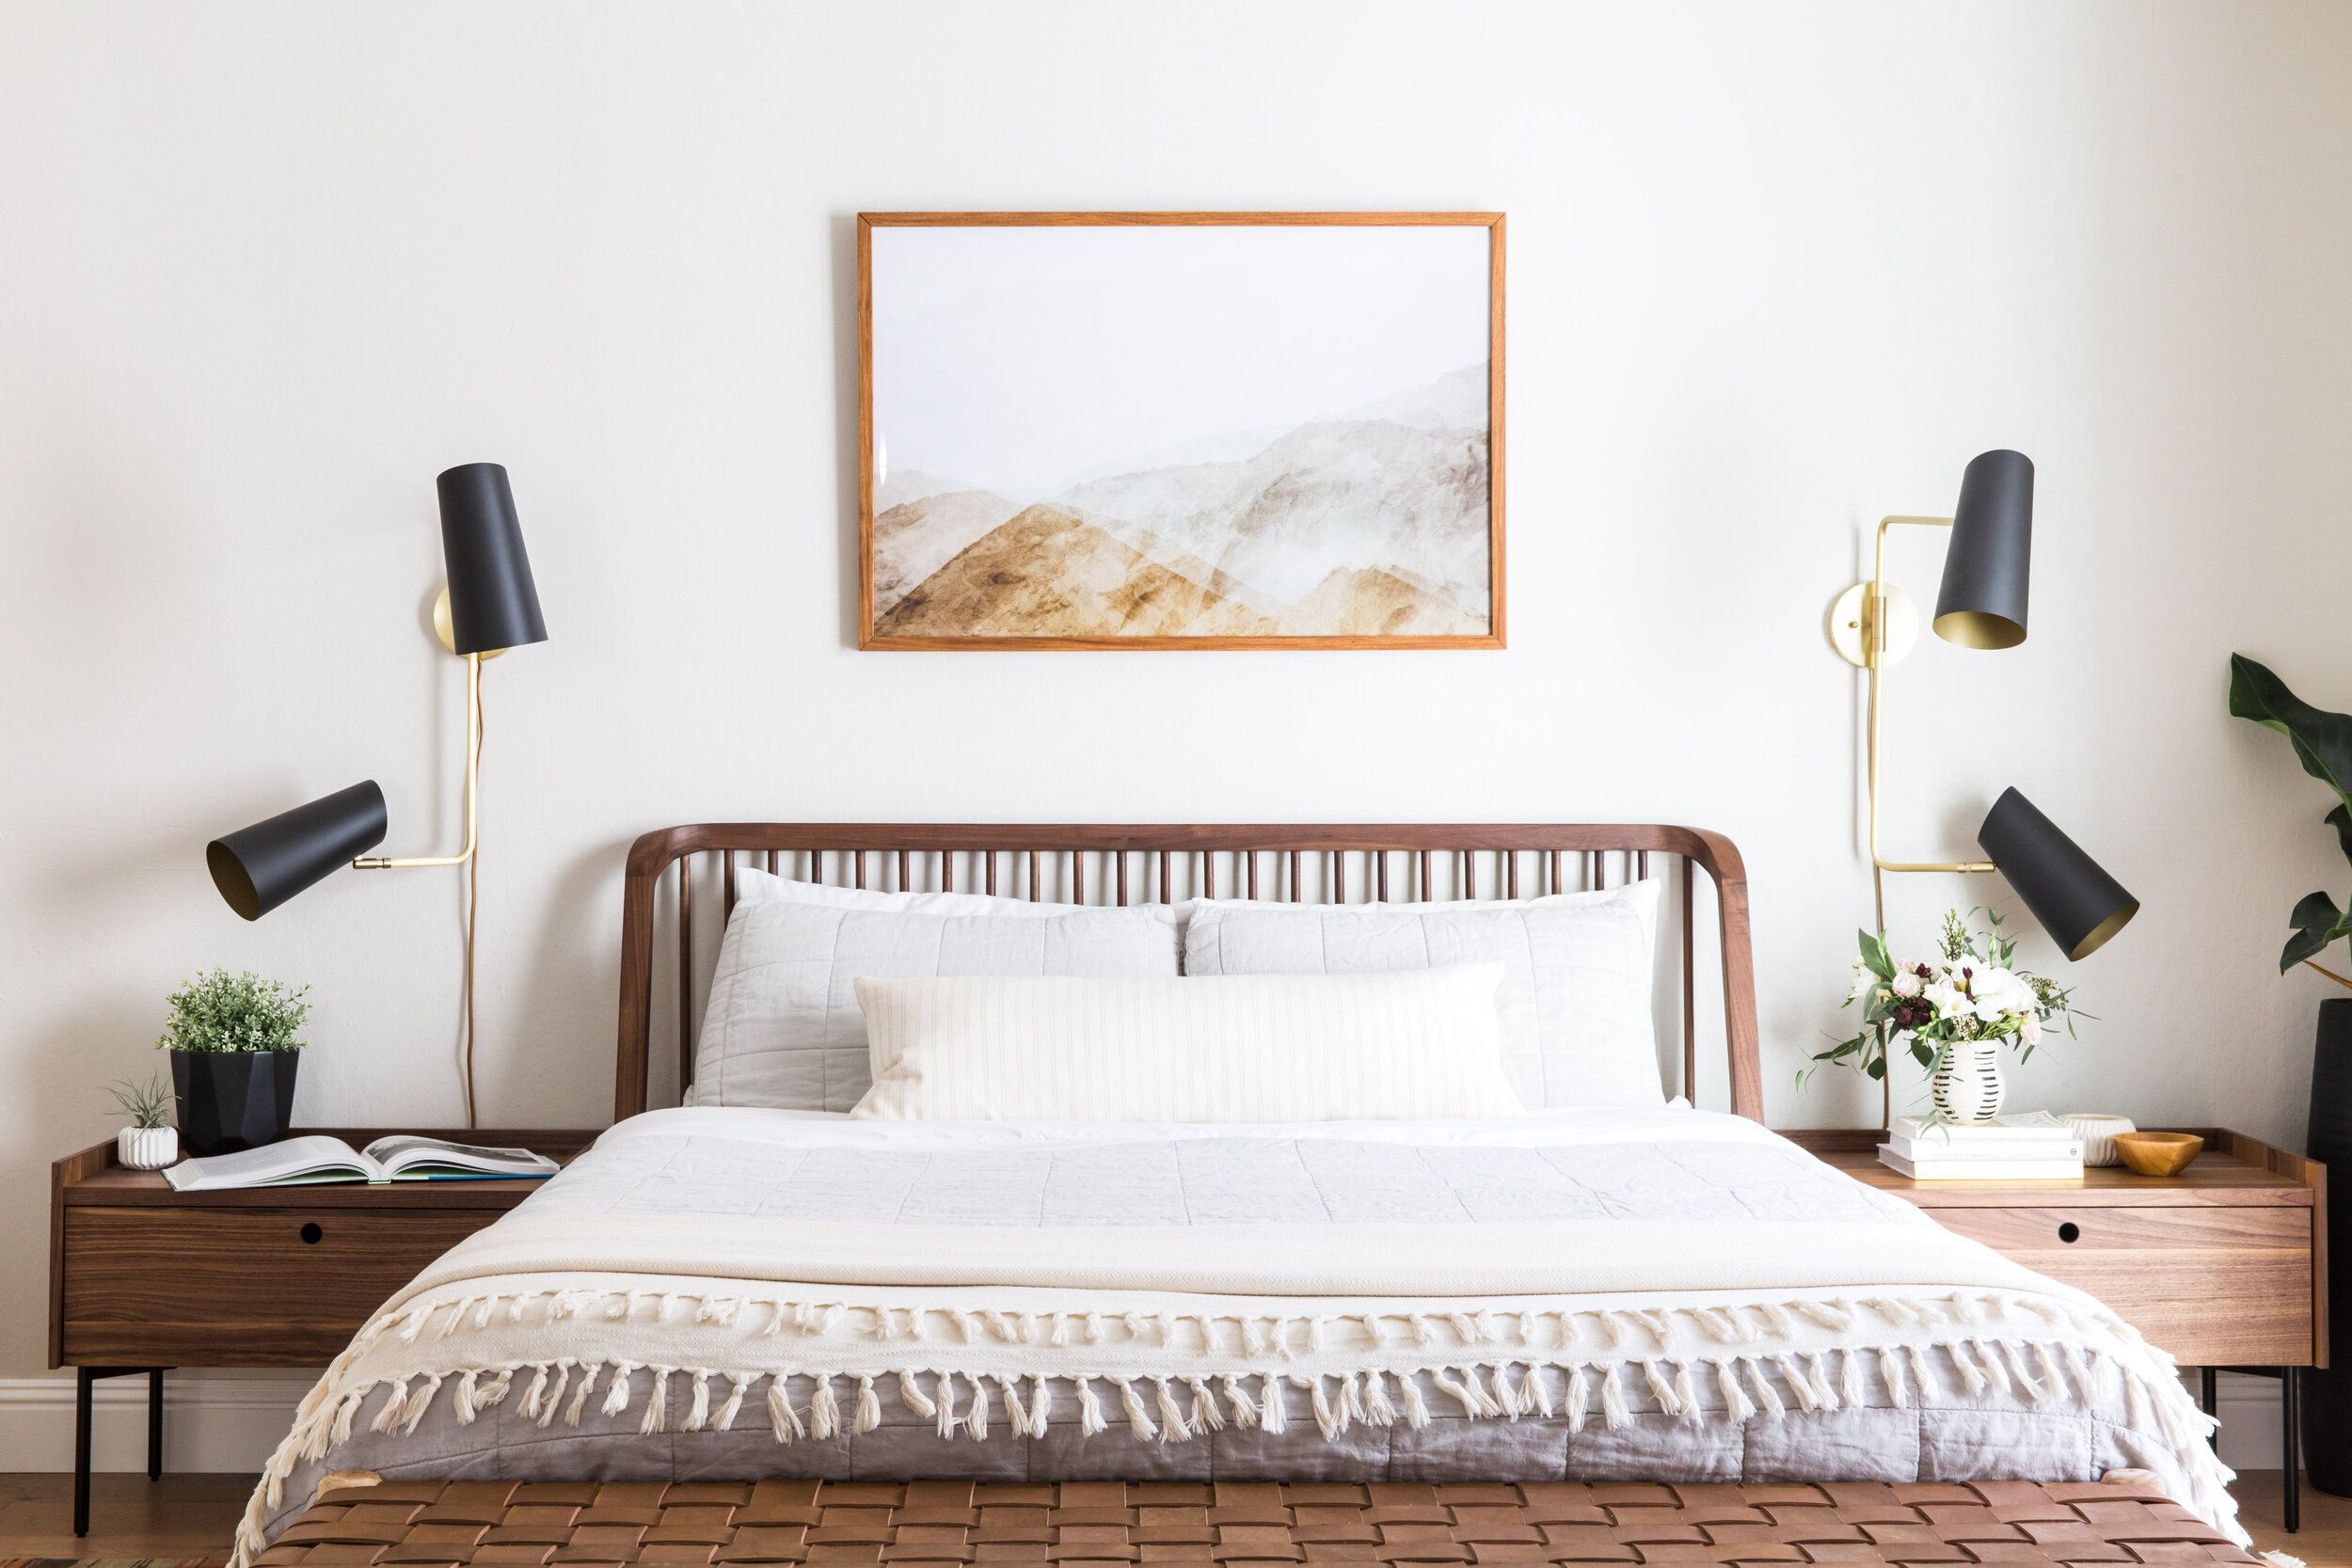 How to Design Your Perfect Bedroom, Based on Your Moon Sign